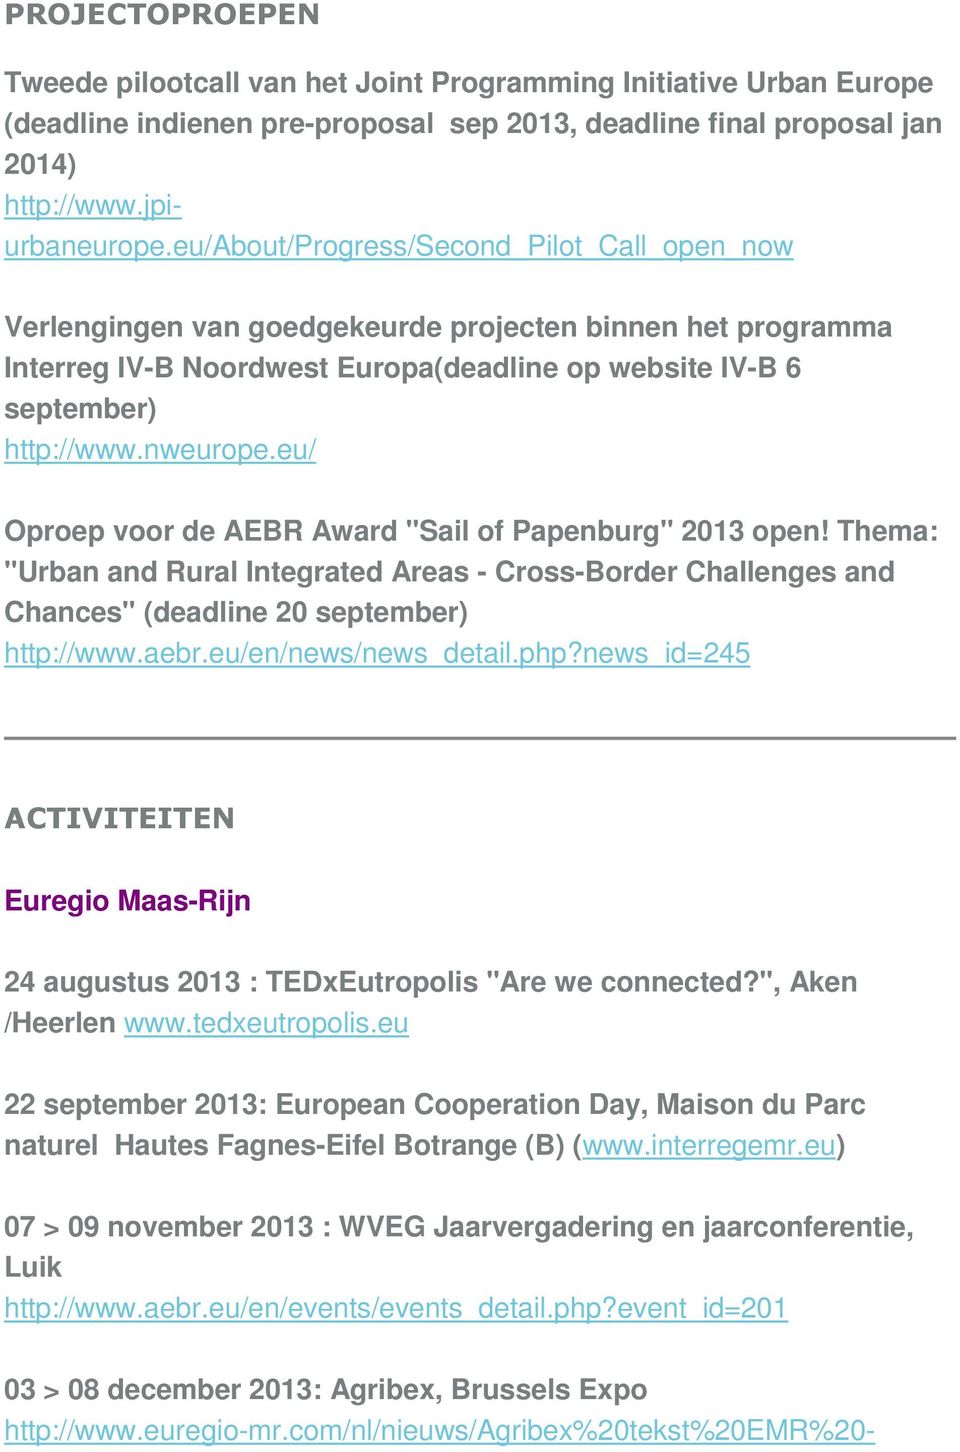 eu/ Oproep voor de AEBR Award "Sail of Papenburg" 2013 open! Thema: "Urban and Rural Integrated Areas - Cross-Border Challenges and Chances" (deadline 20 september) http://www.aebr.